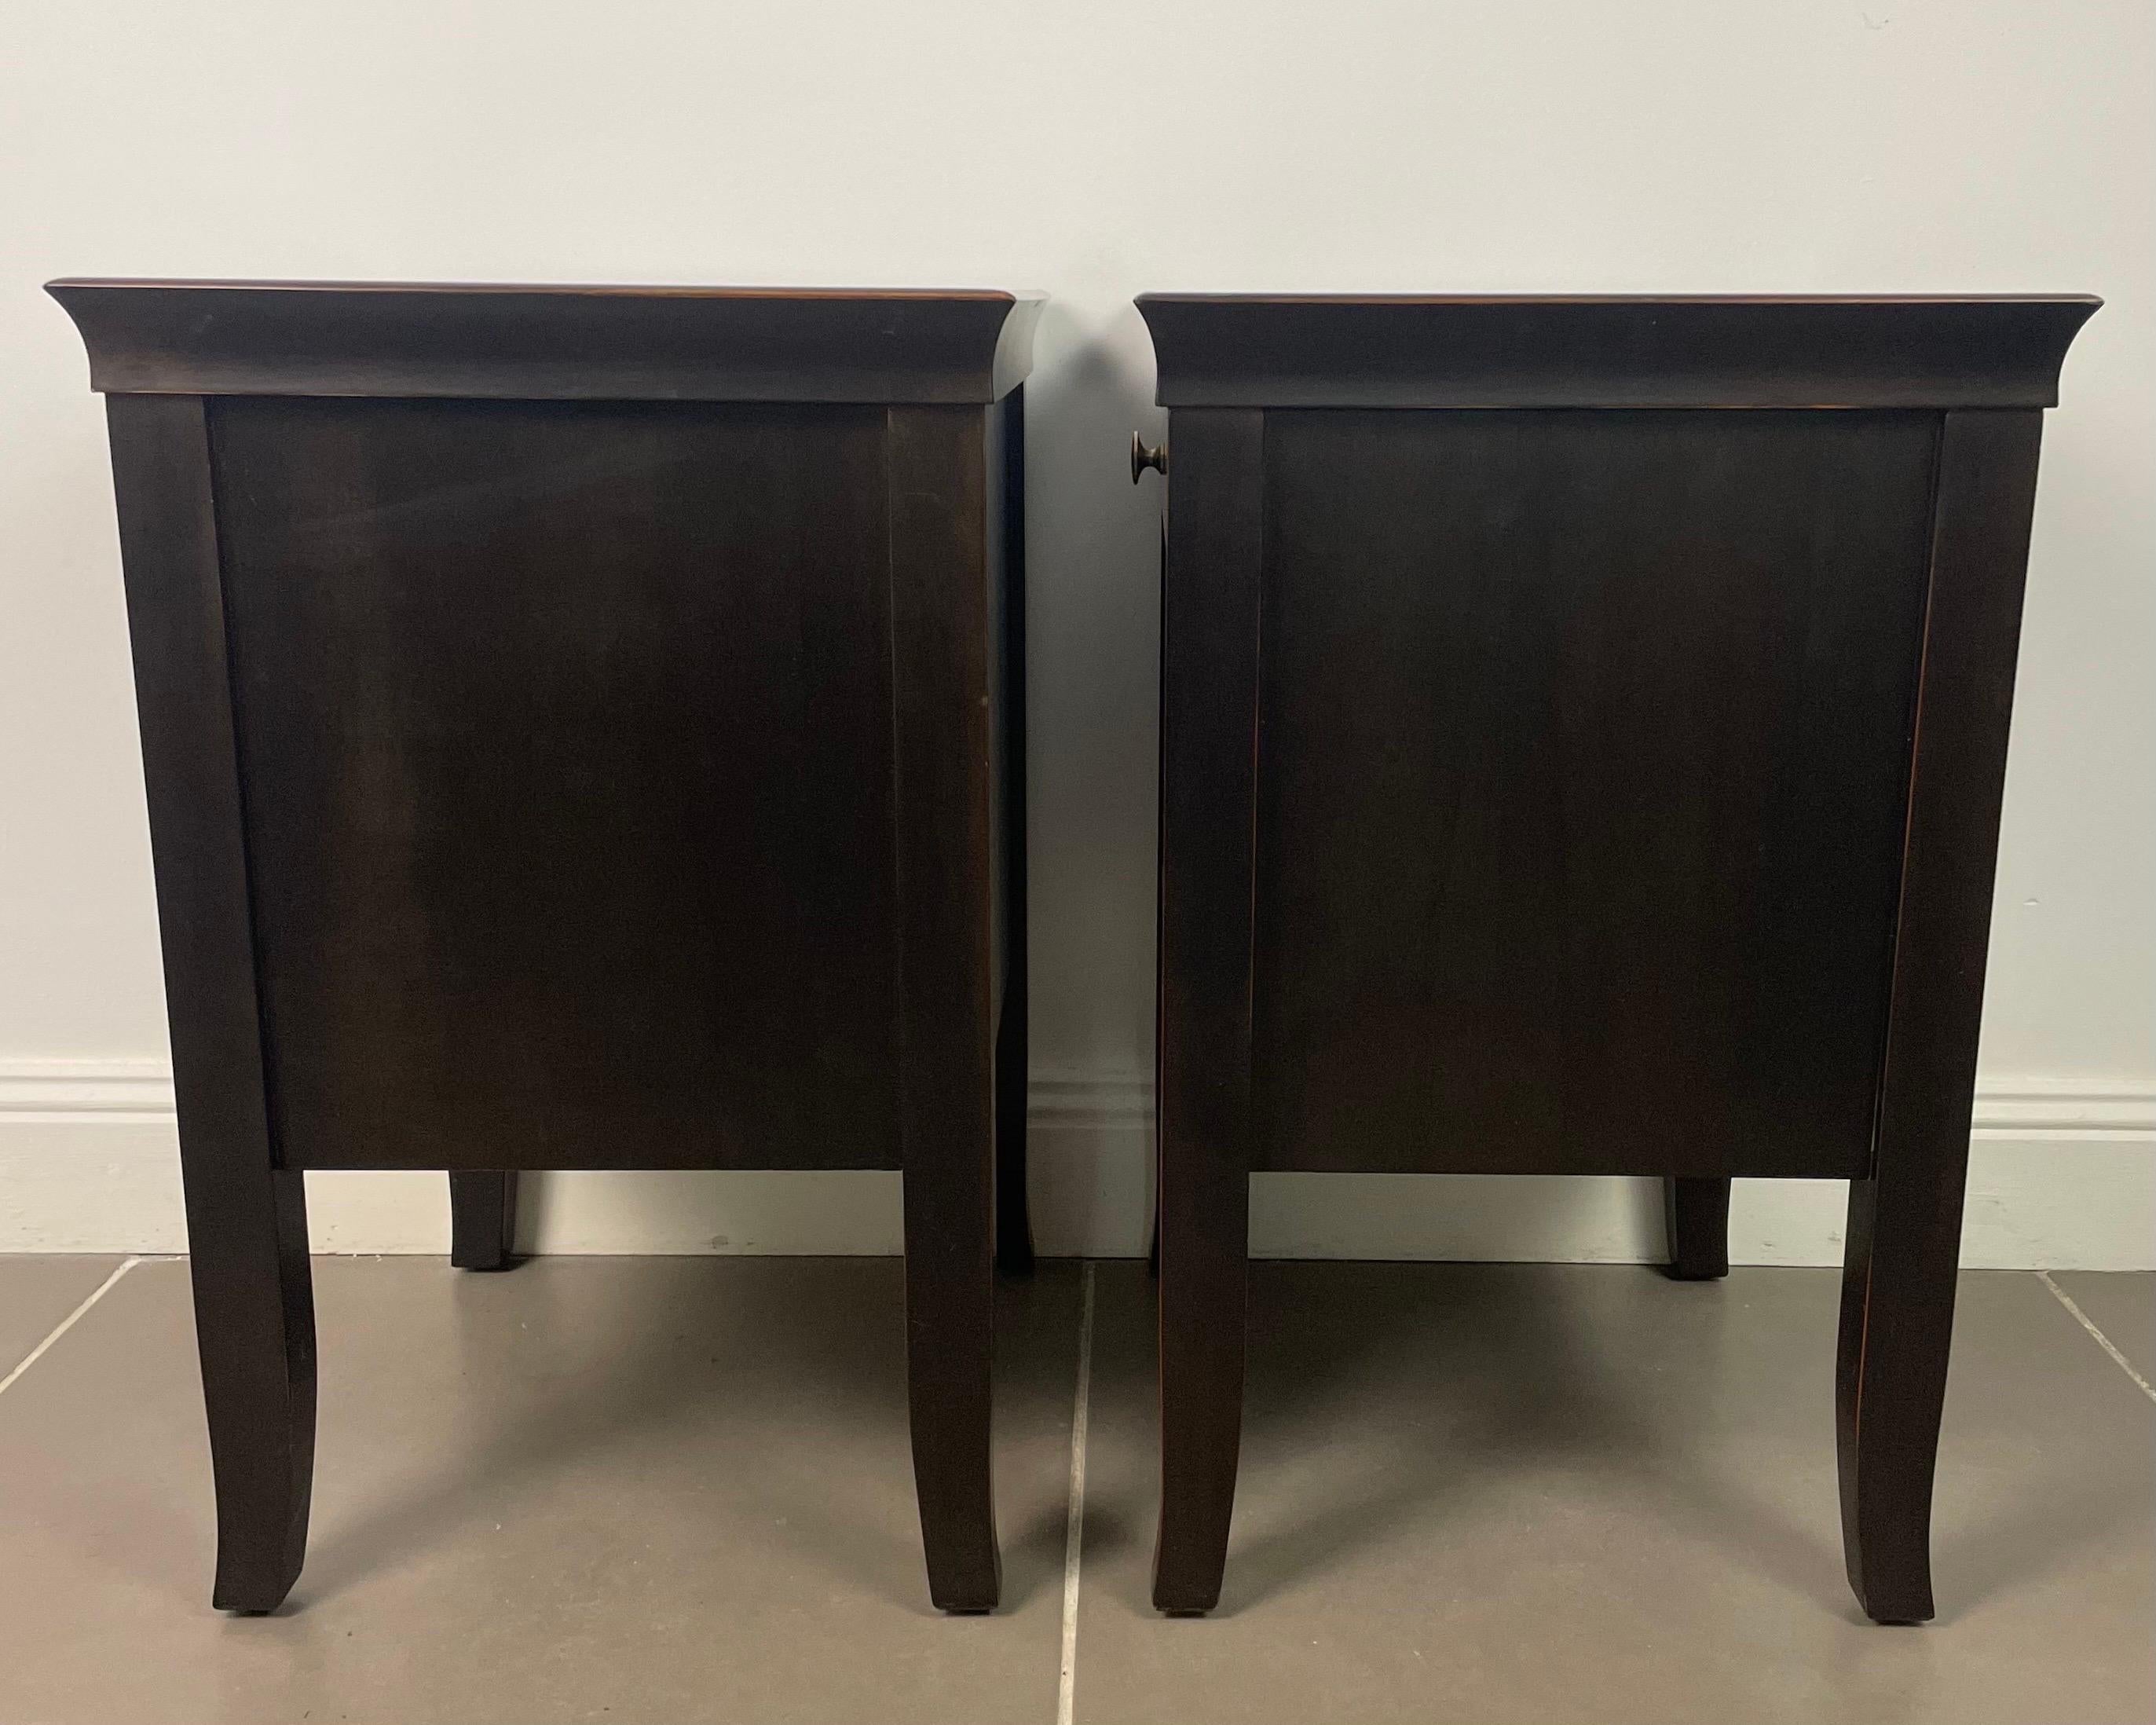 Lacquered Pair of bedside tables nightsand black lacquered wood 1950's vintage Asian style For Sale